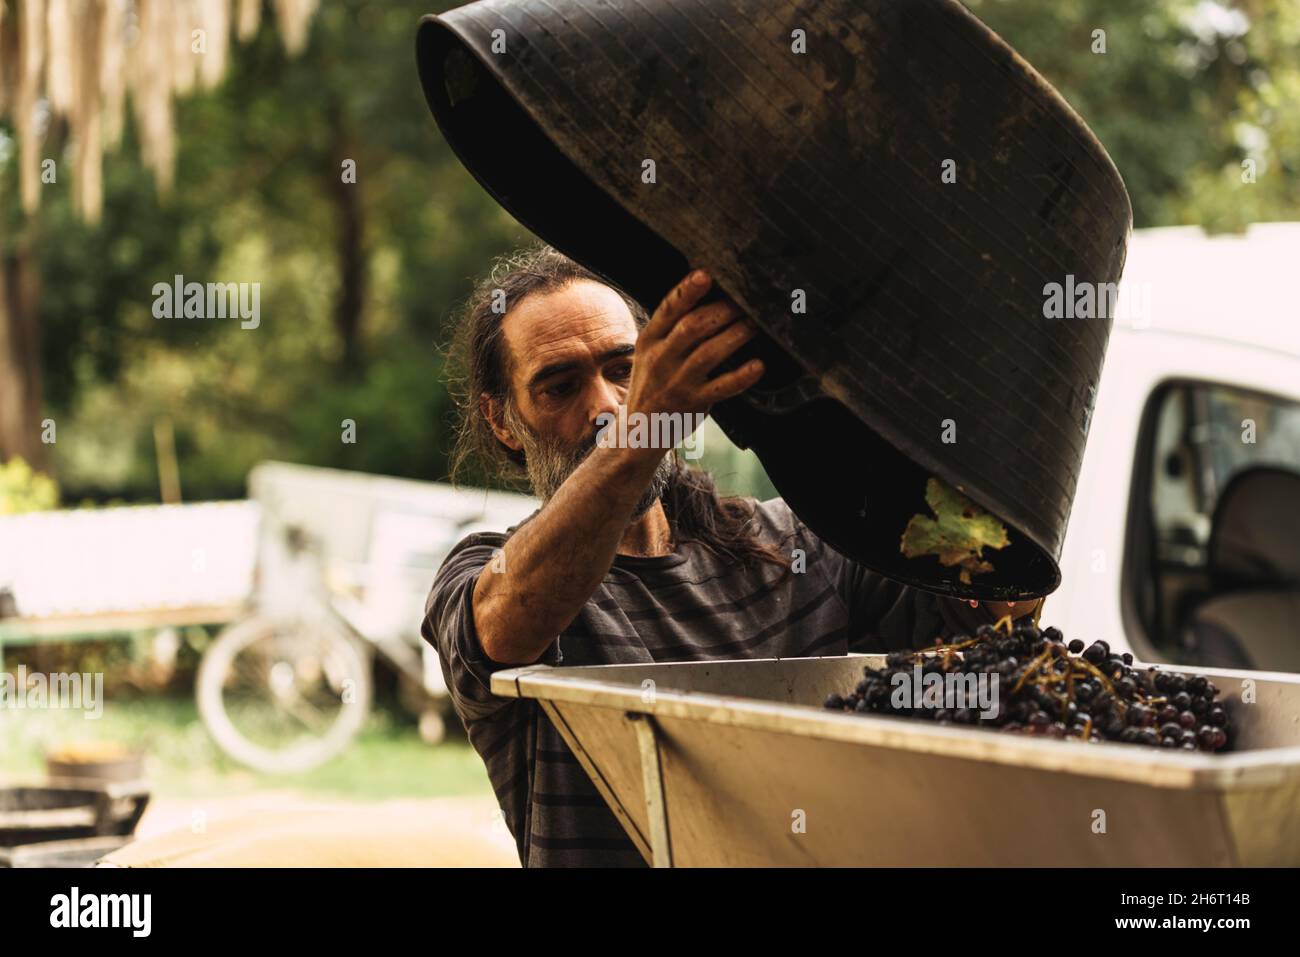 Man tipping a basket of grapes into a press to produce wine. Stock Photo